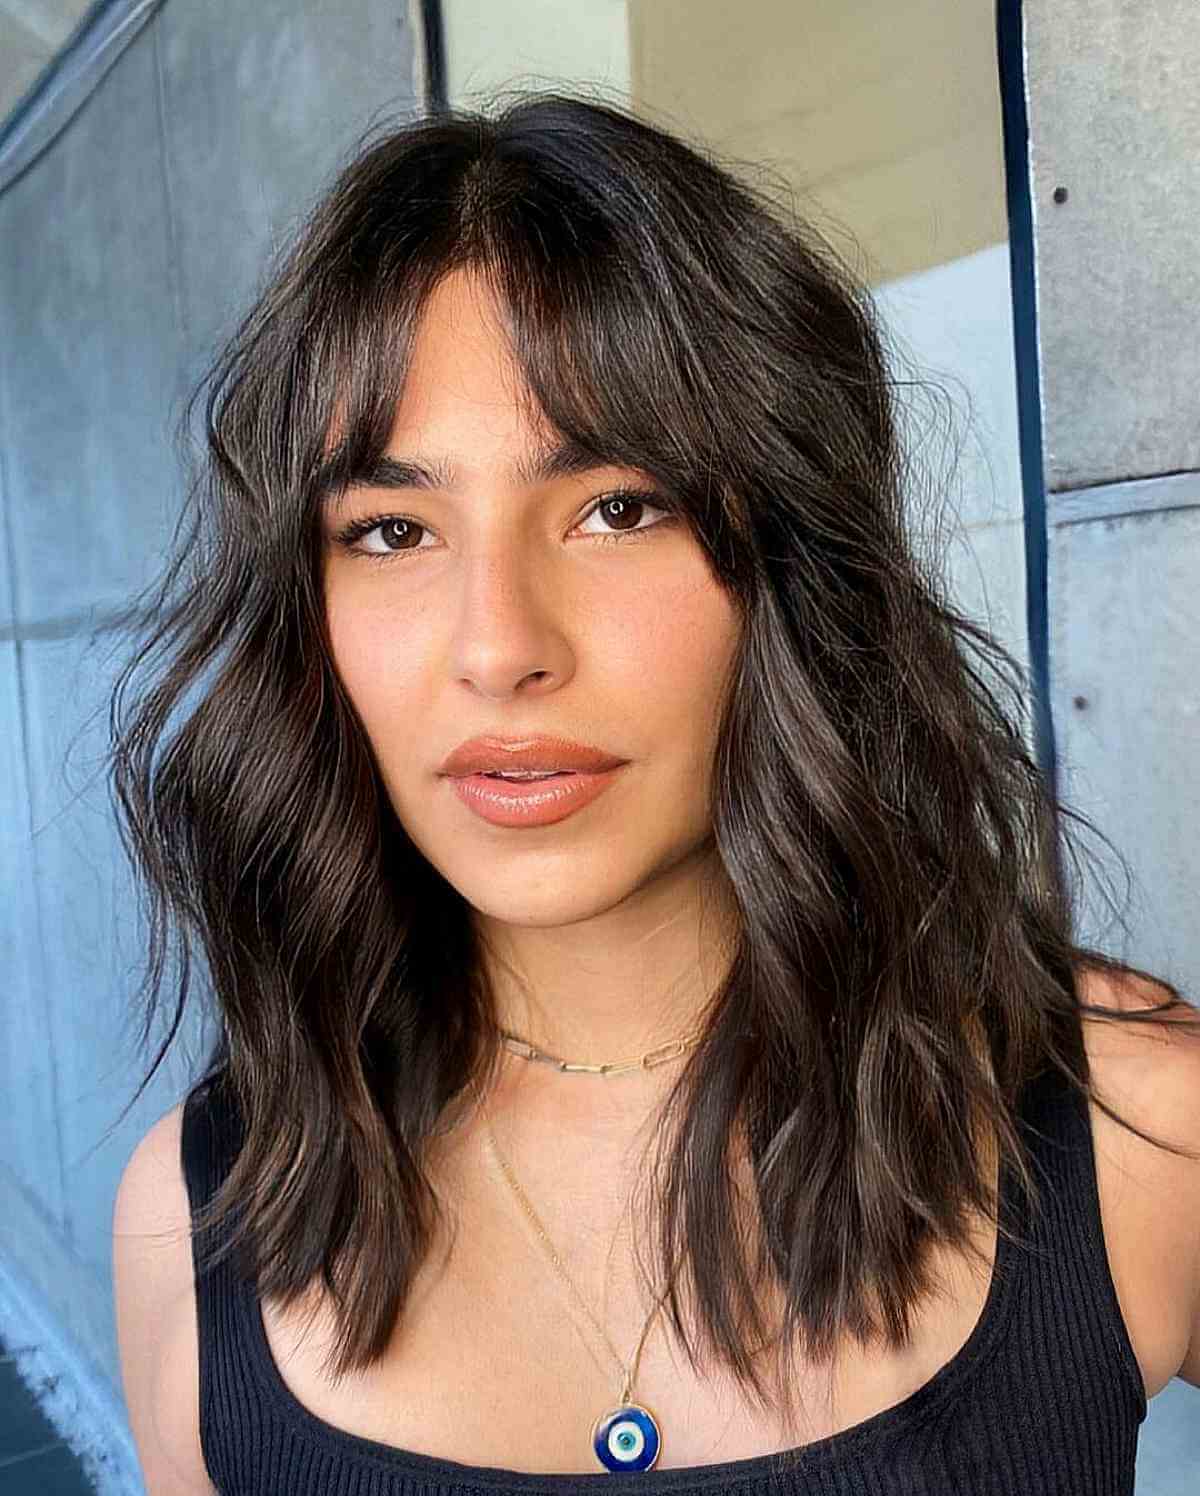 70s-Inspired Bangs and a Middle Part